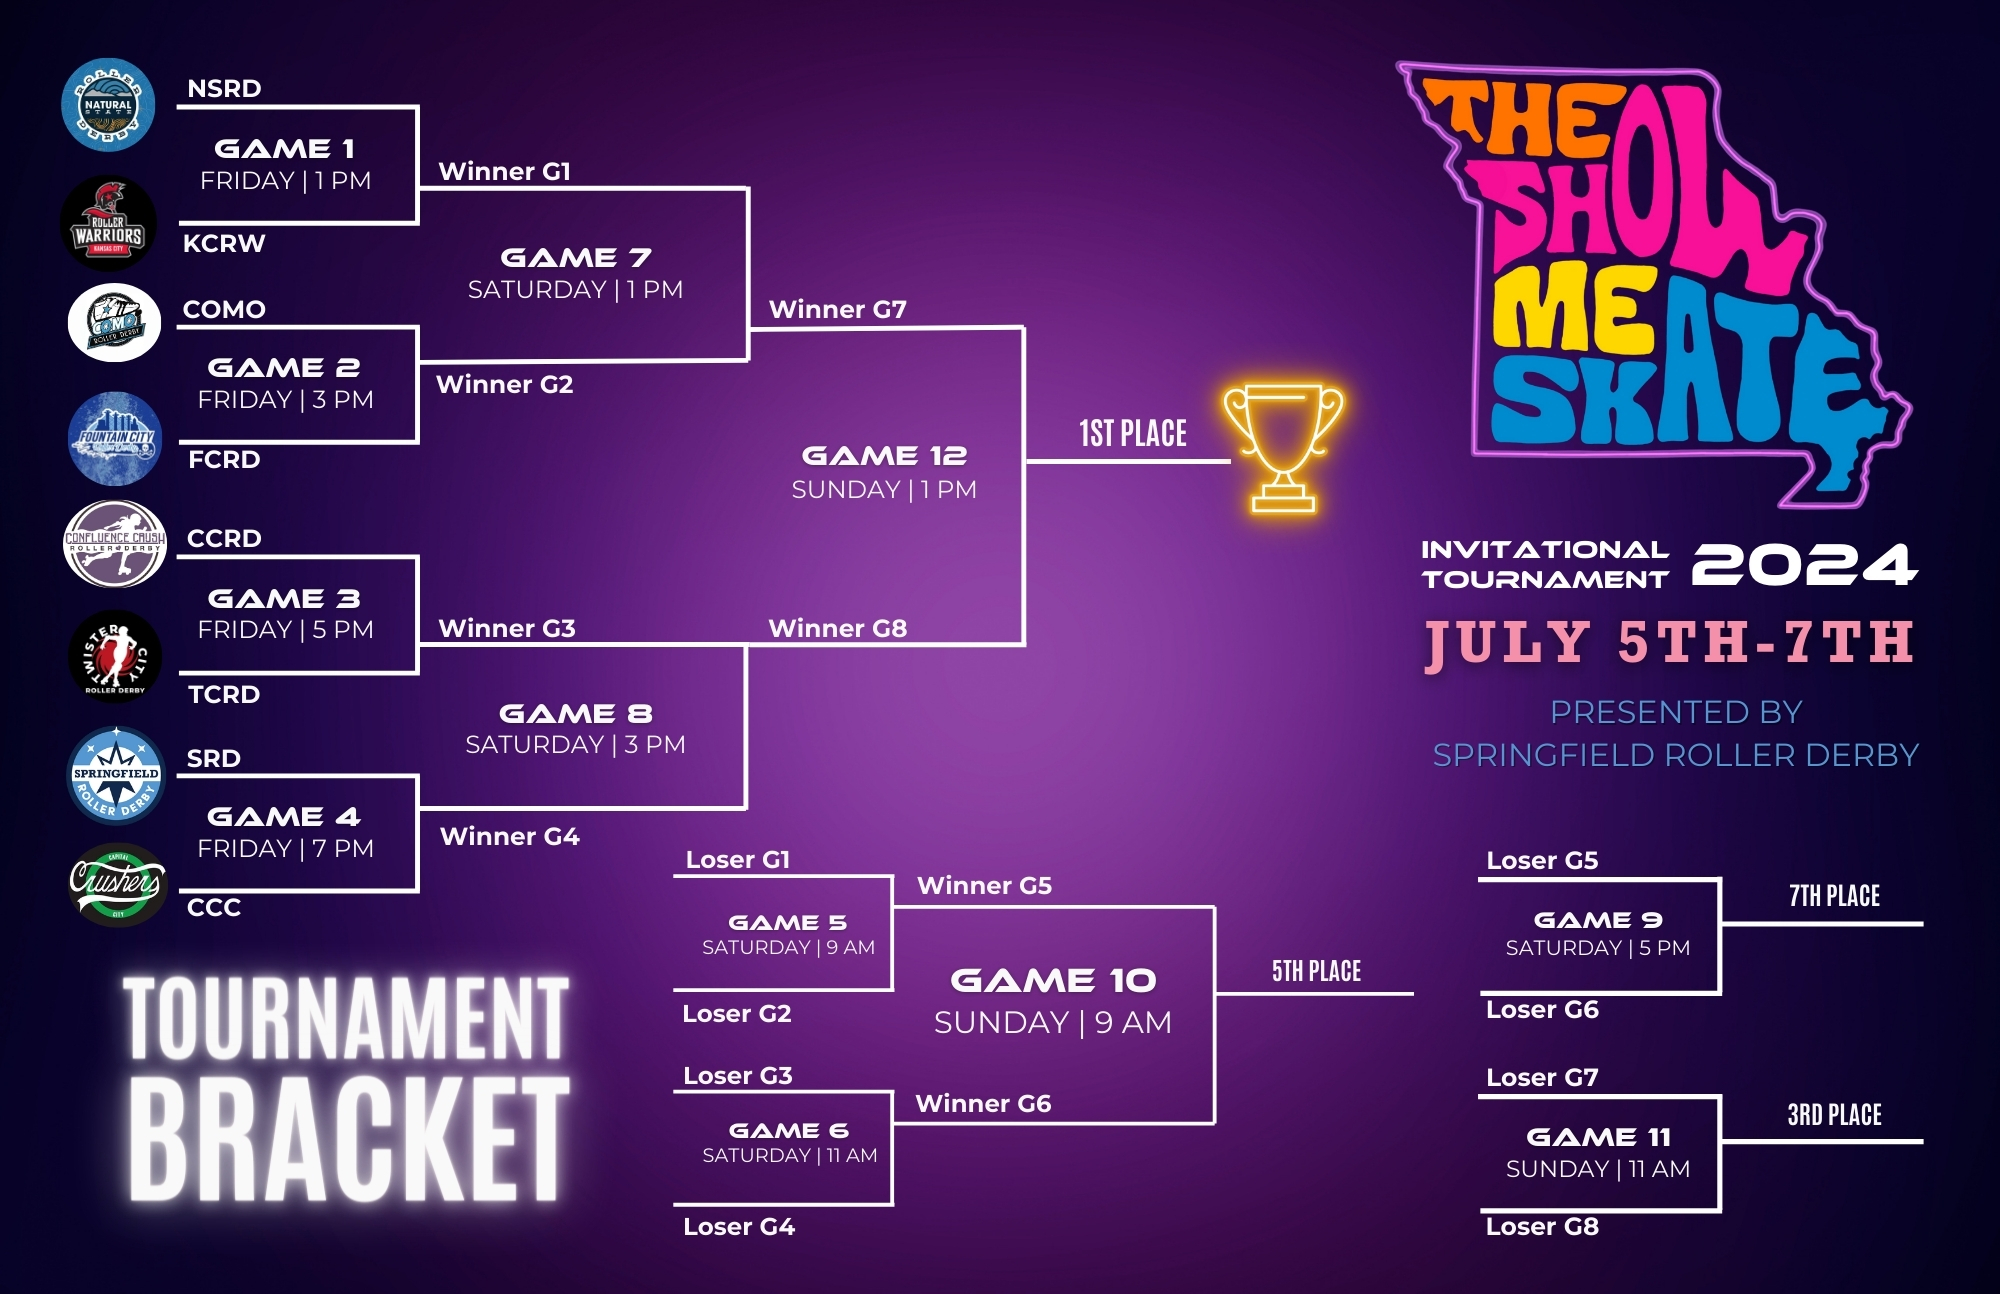 The official tournament schedule graphic for Show Me Skate 2024